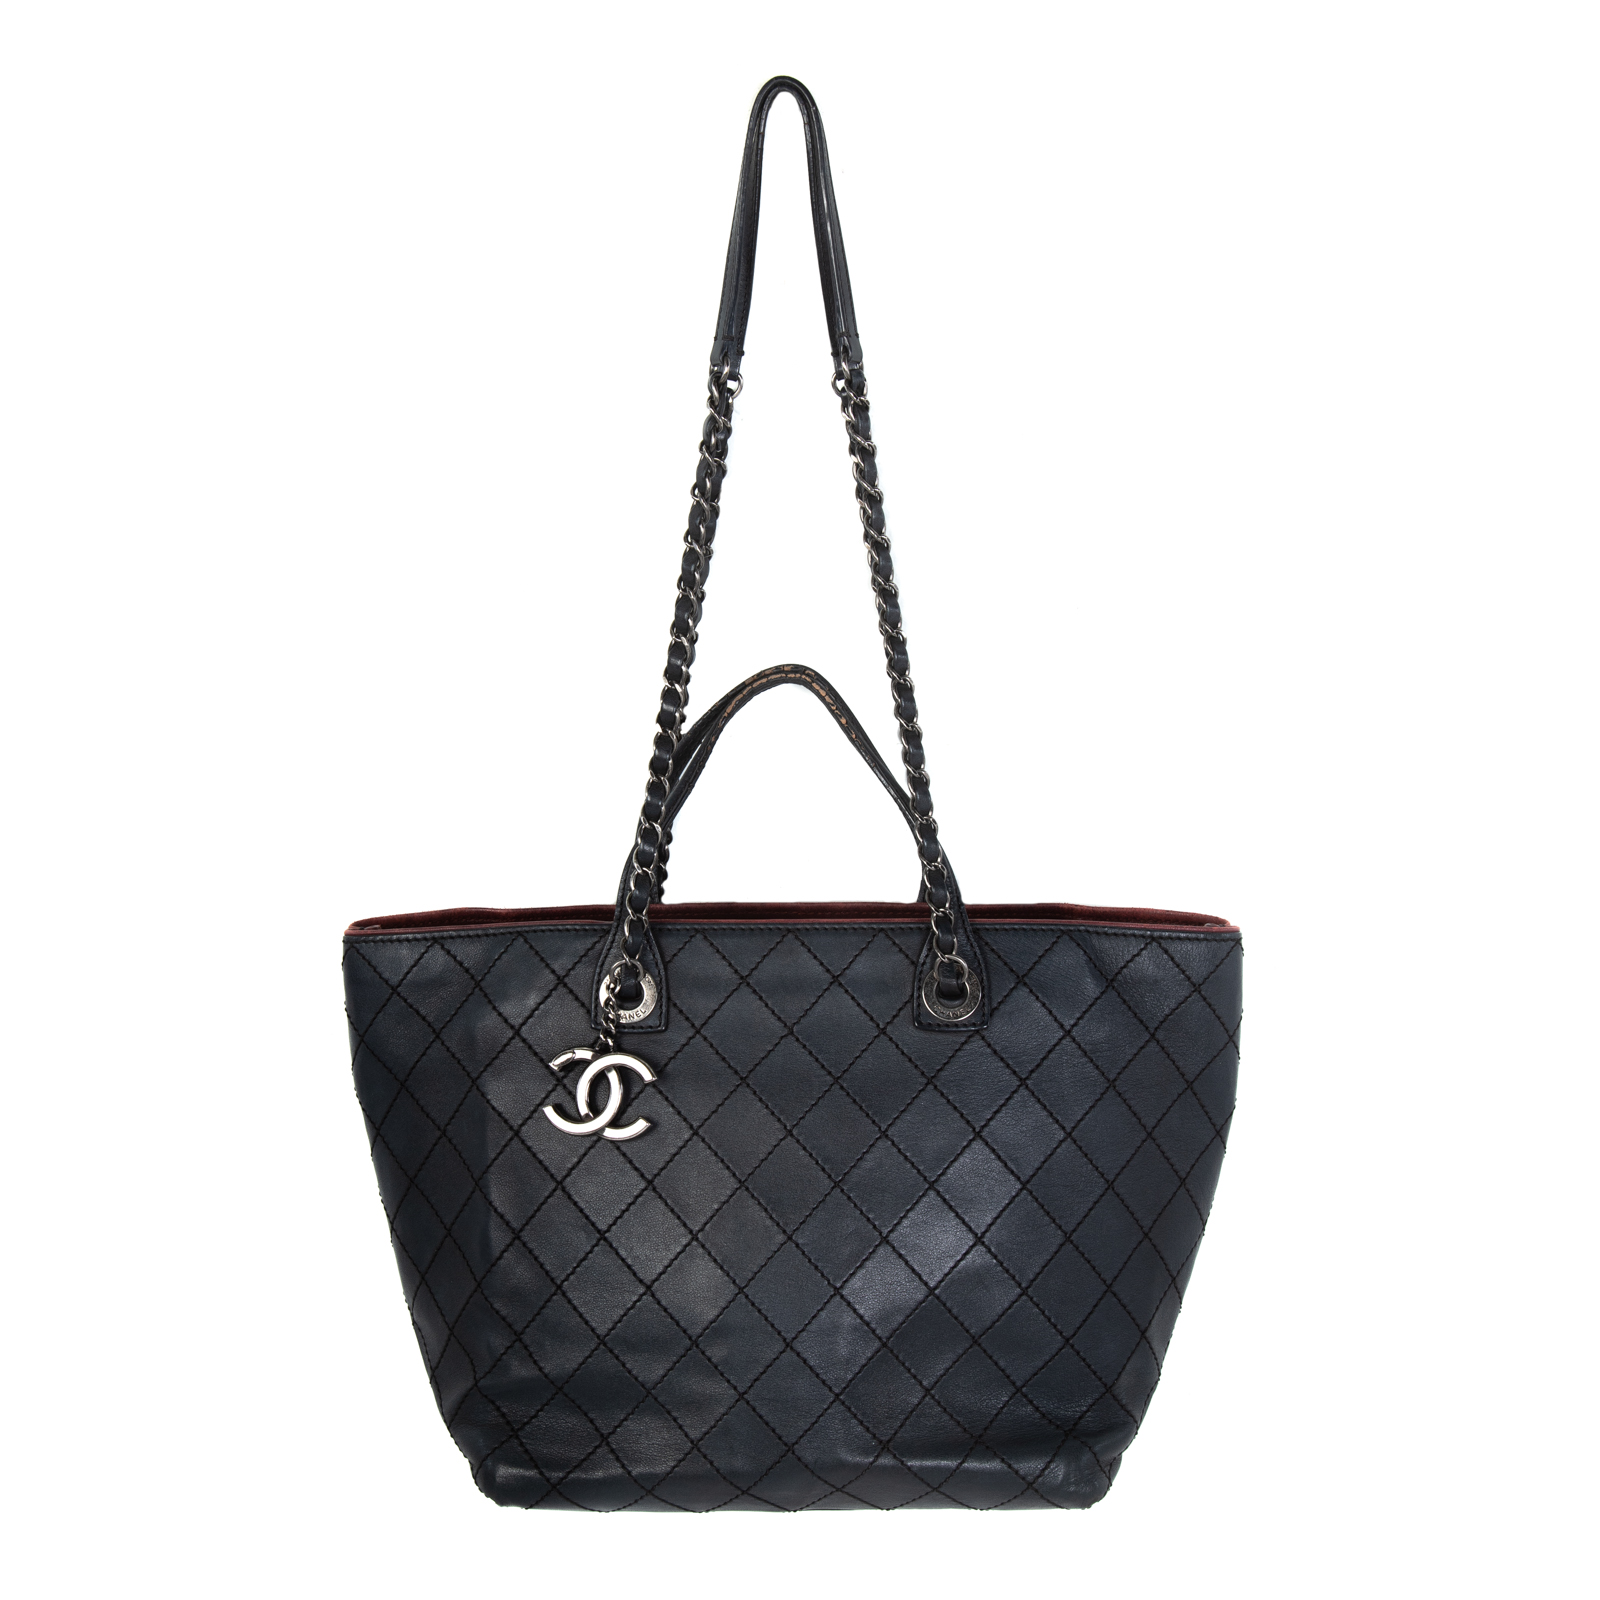 A CHANEL SMALL SHOPPING FEVER TOTE 3349c1